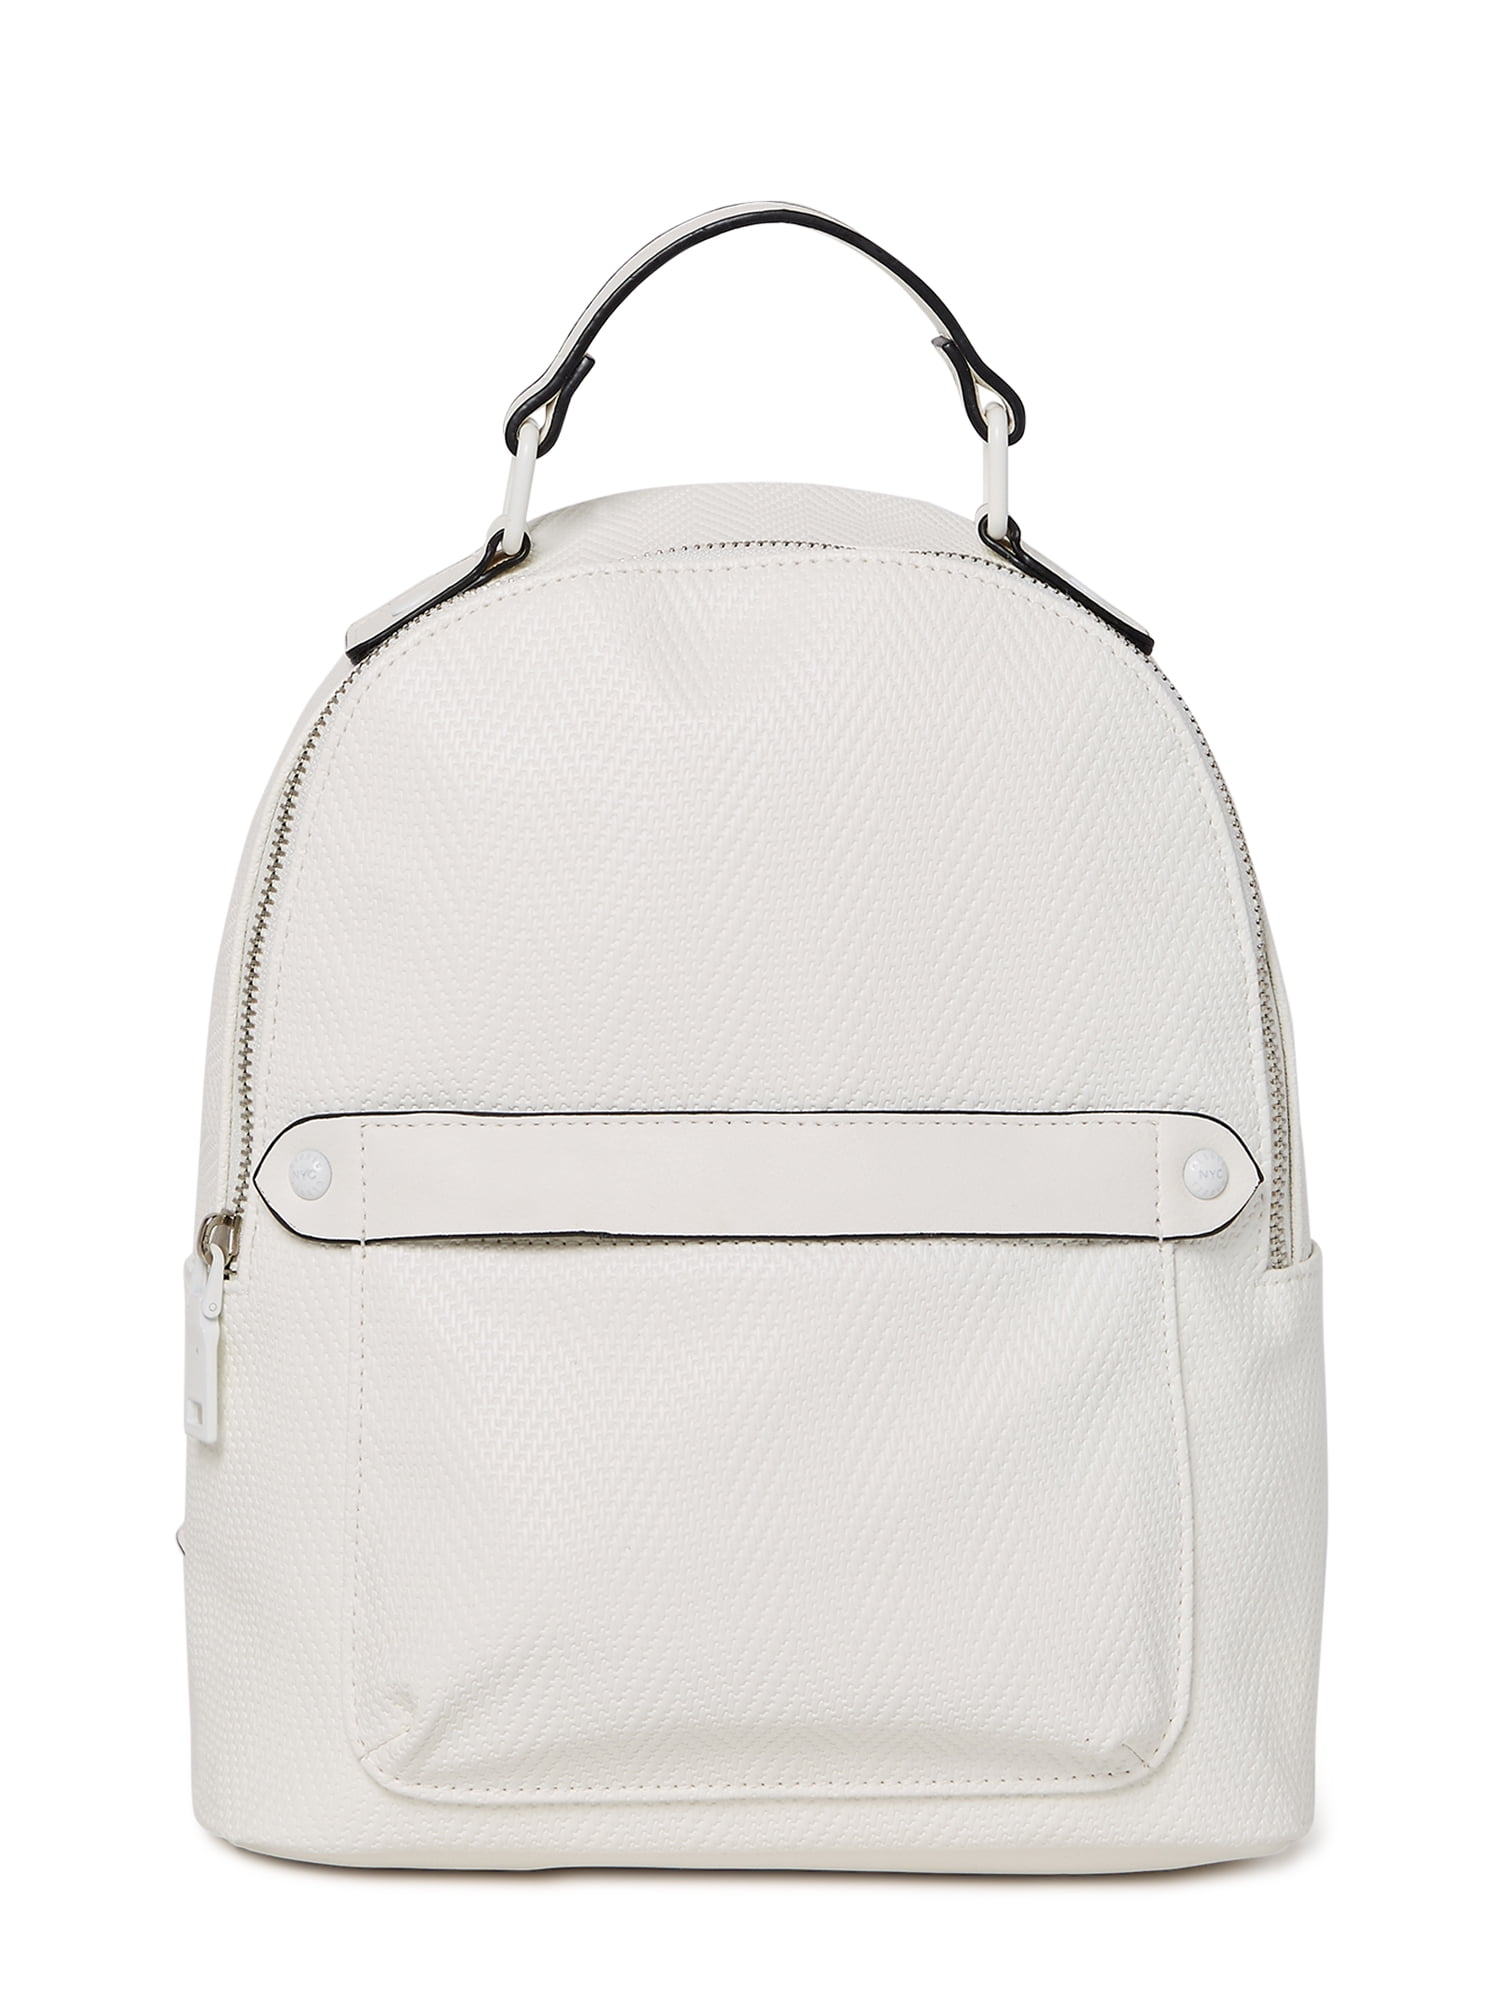 Madden NYC Women's Faux Leather Mini Backpack White - Walmart.com